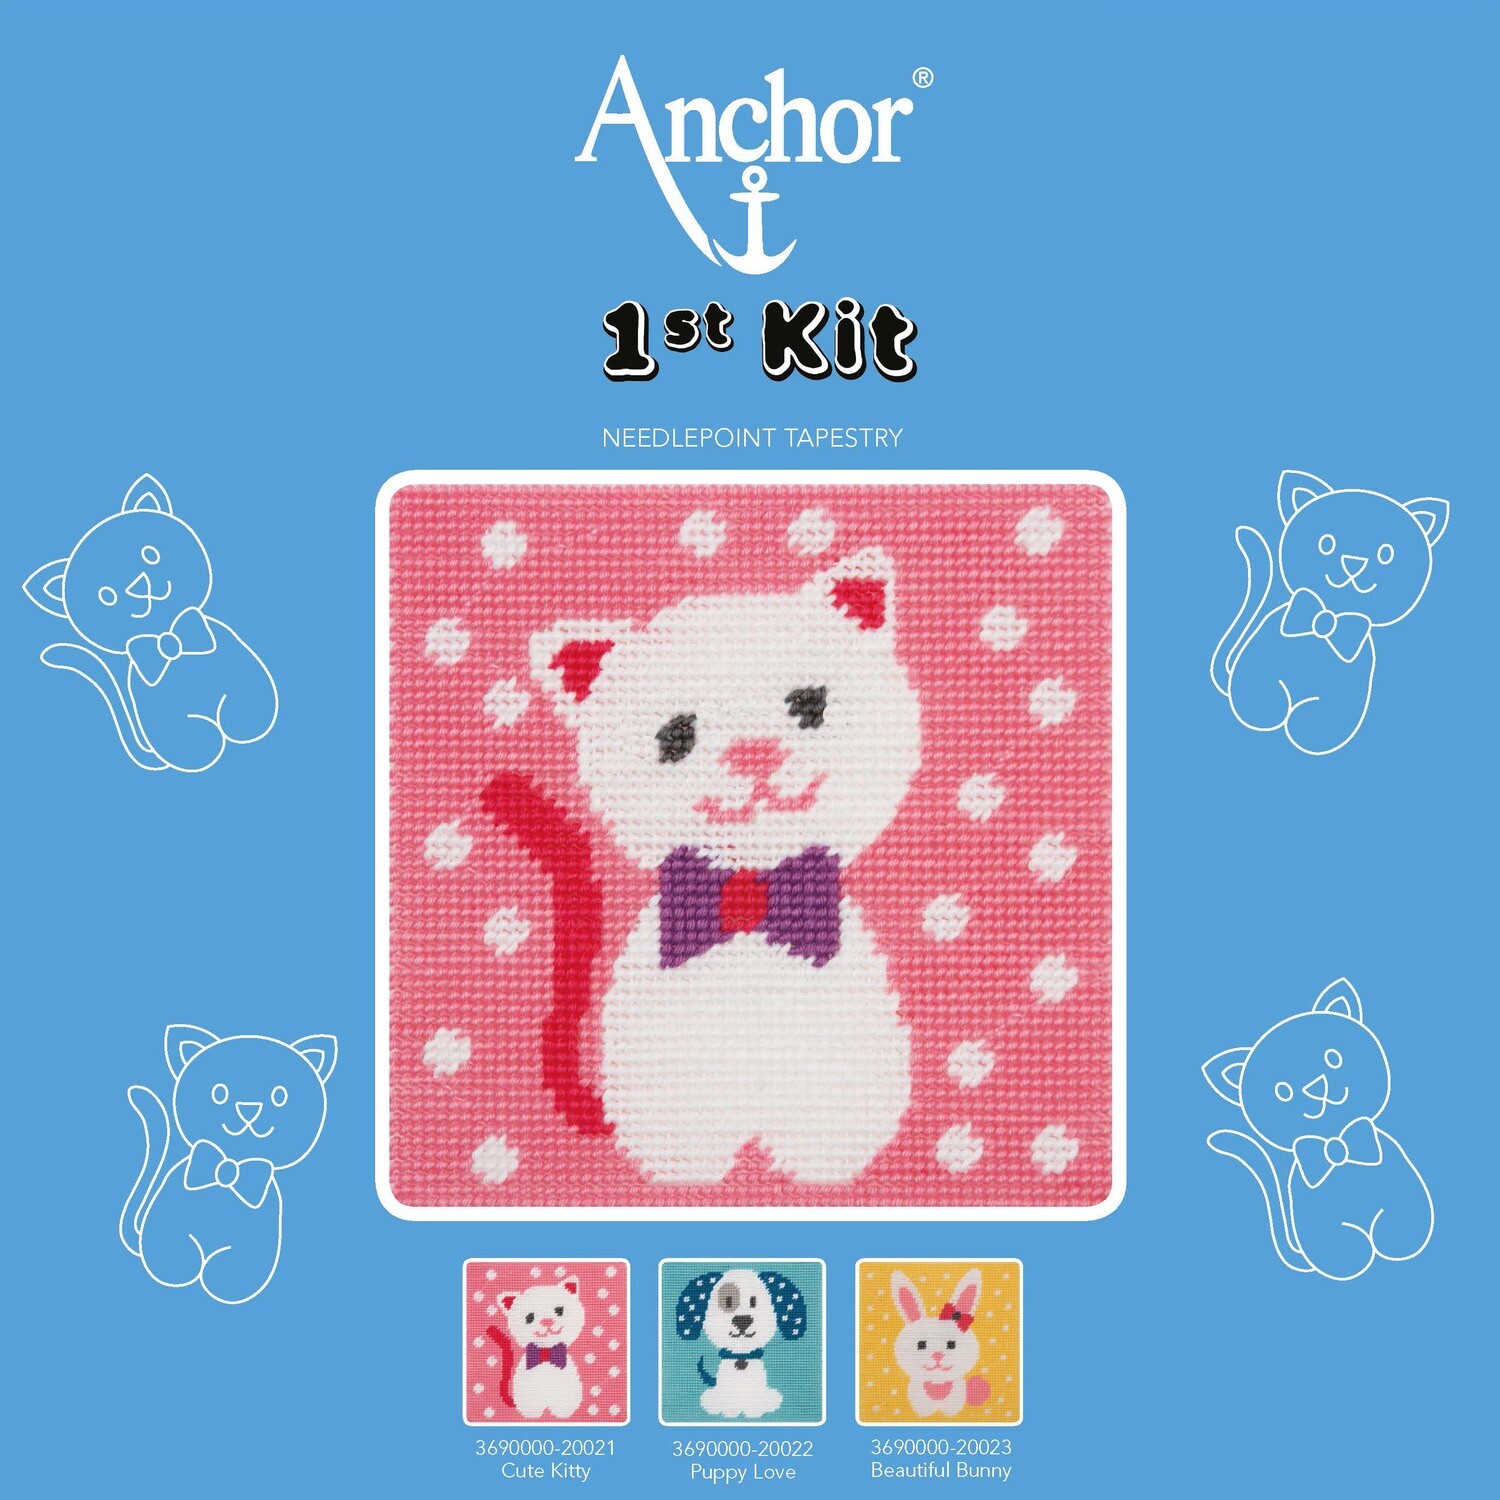 Anchor 1st Kit - Cute Kitty Tapestry